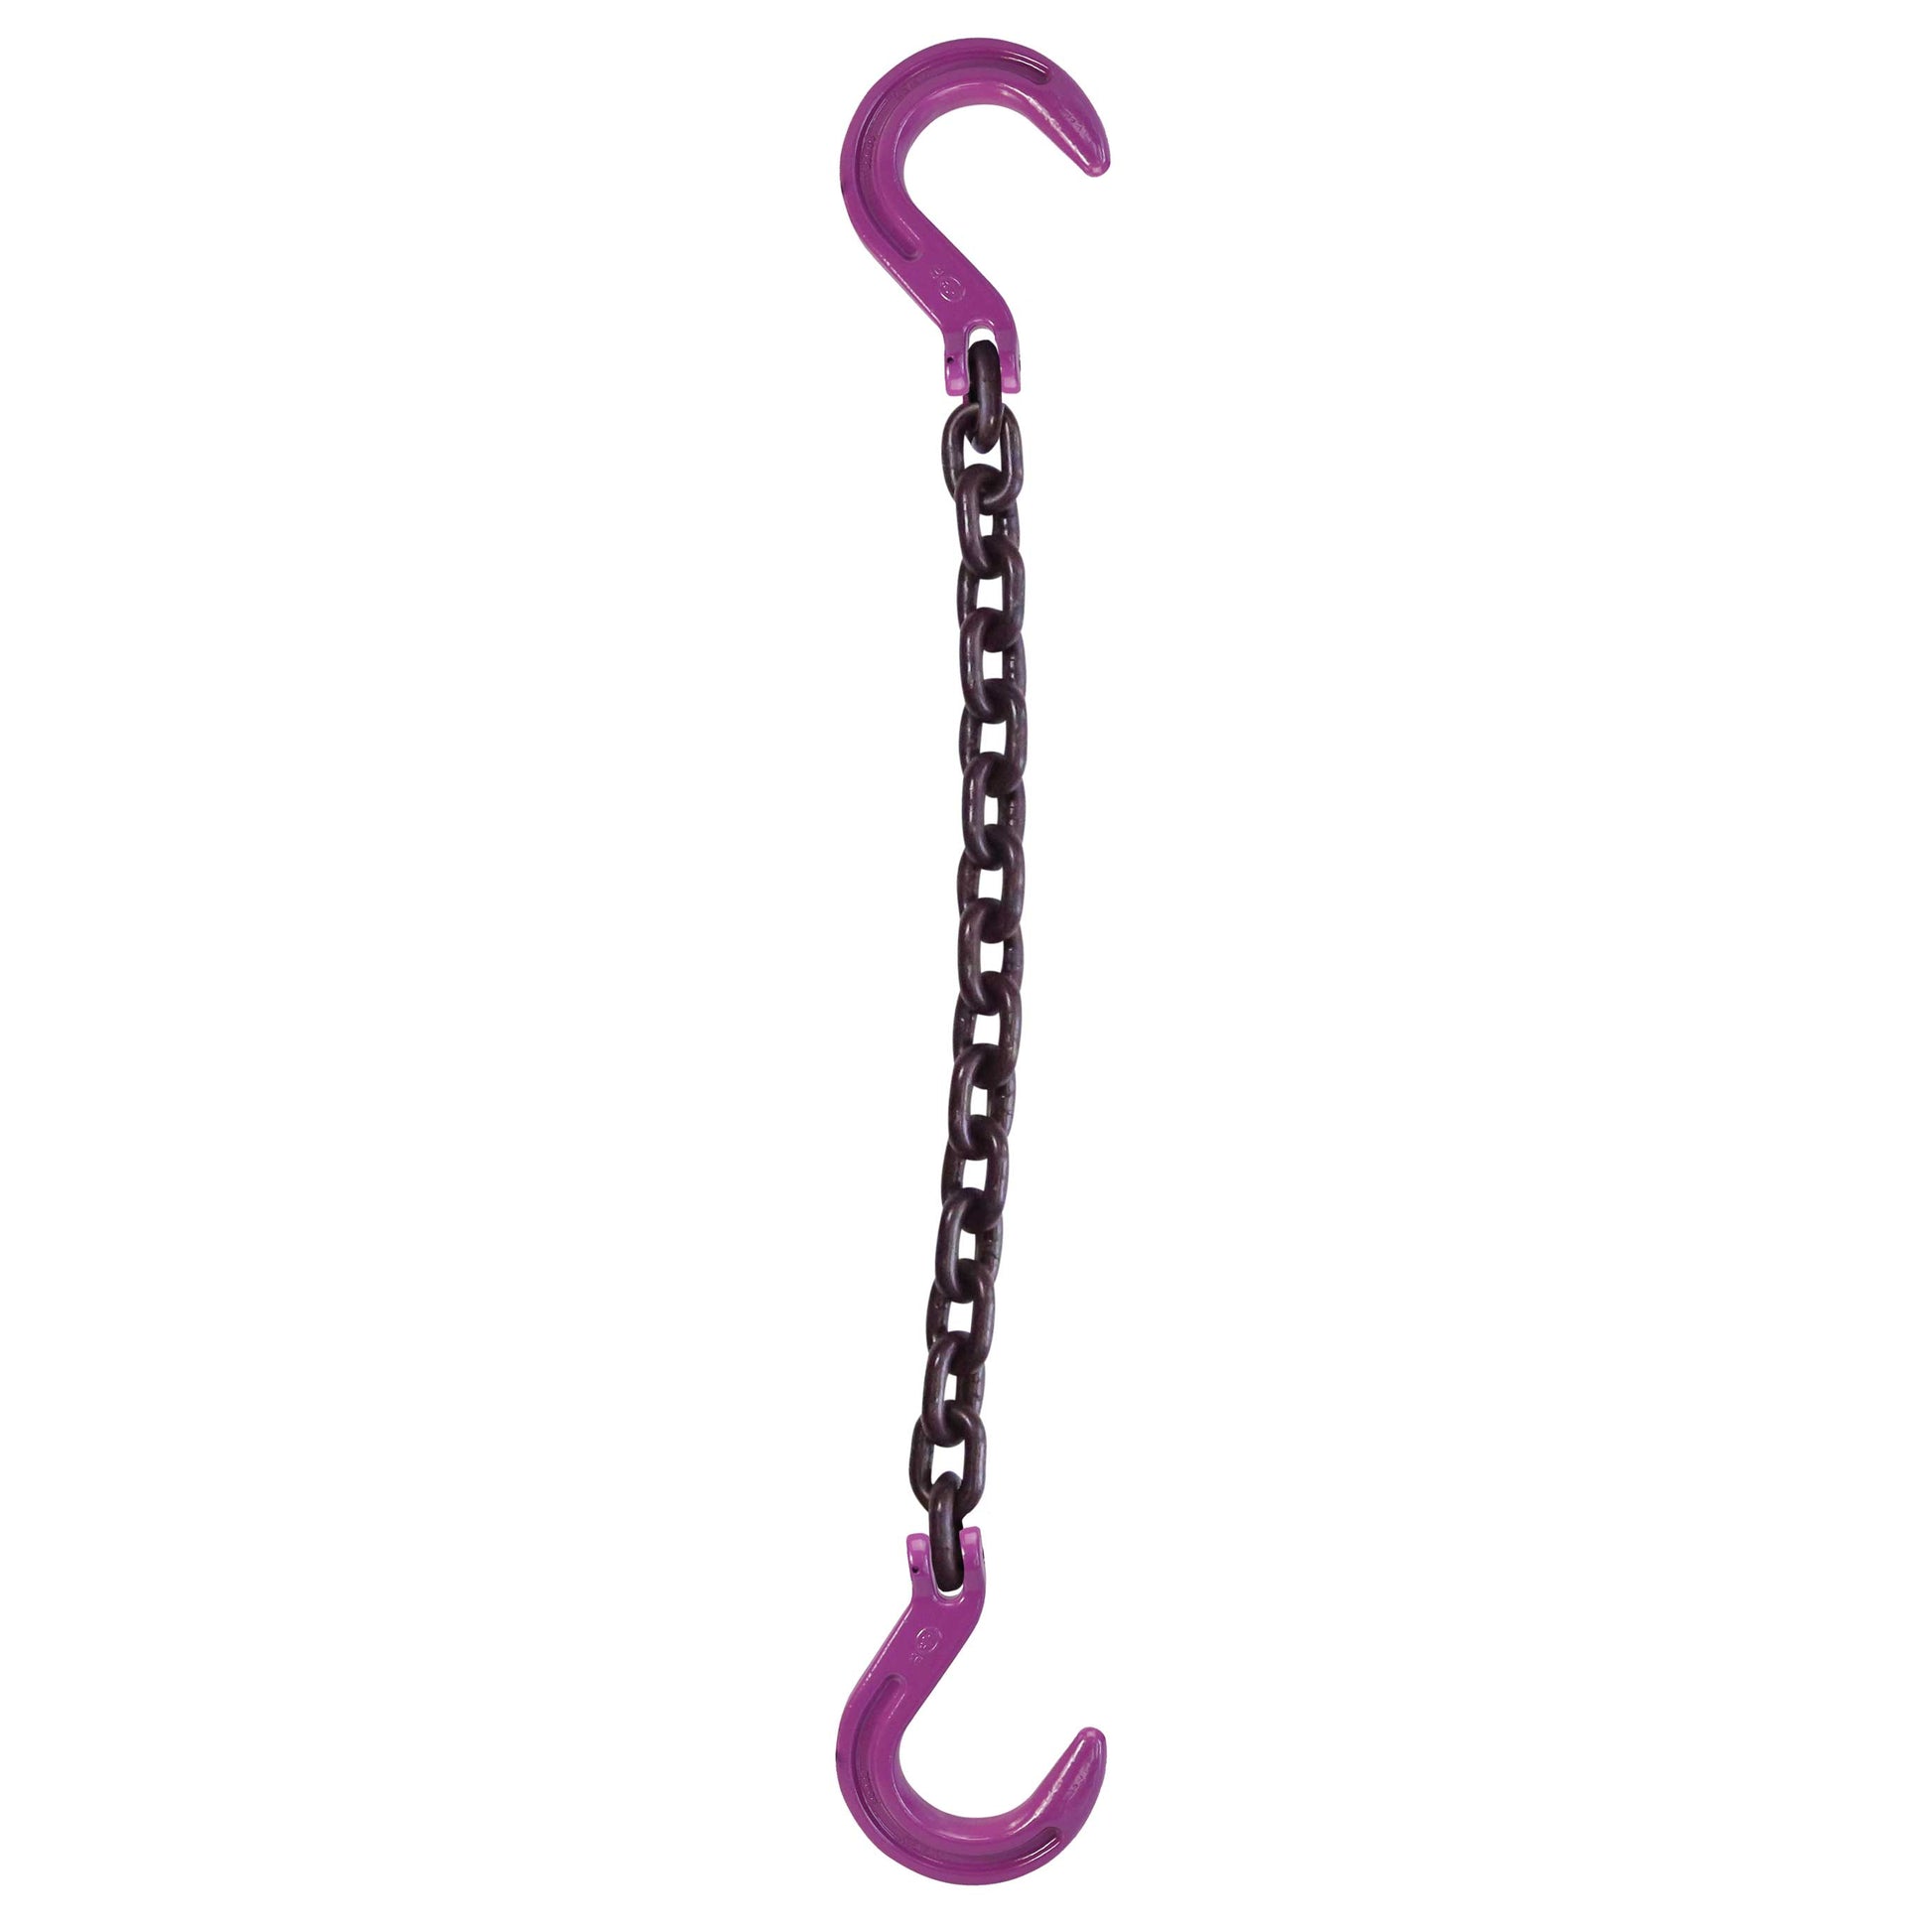 12 inch x 10 foot Single Leg Chain Sling w Foundry & Foundry Hooks Grade 100 image 1 of 2